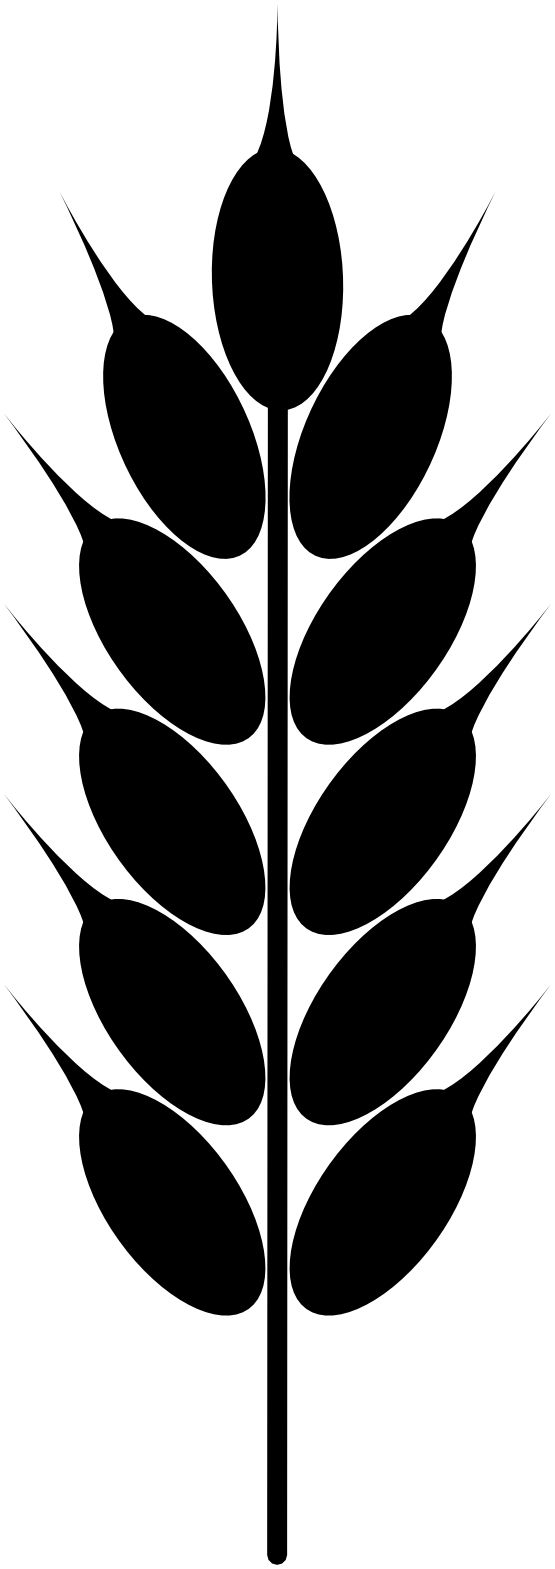 Clipart: Wheat Black And White 